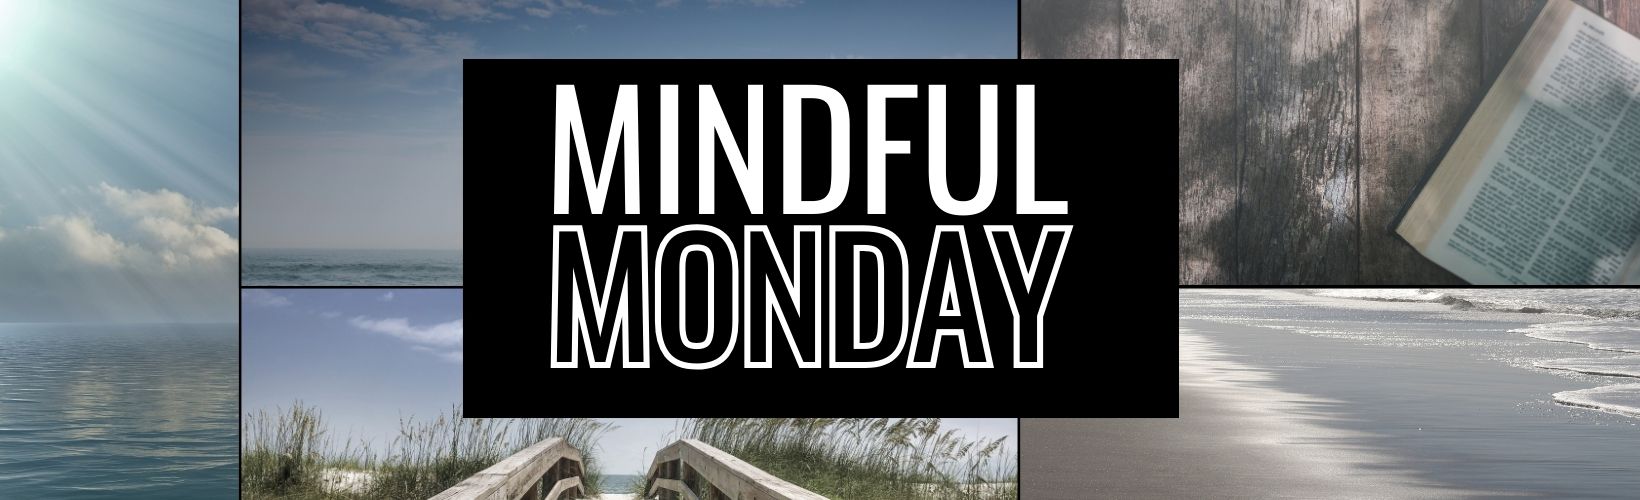 Mindful Mondays: How to Be Strong and Courageous in Life